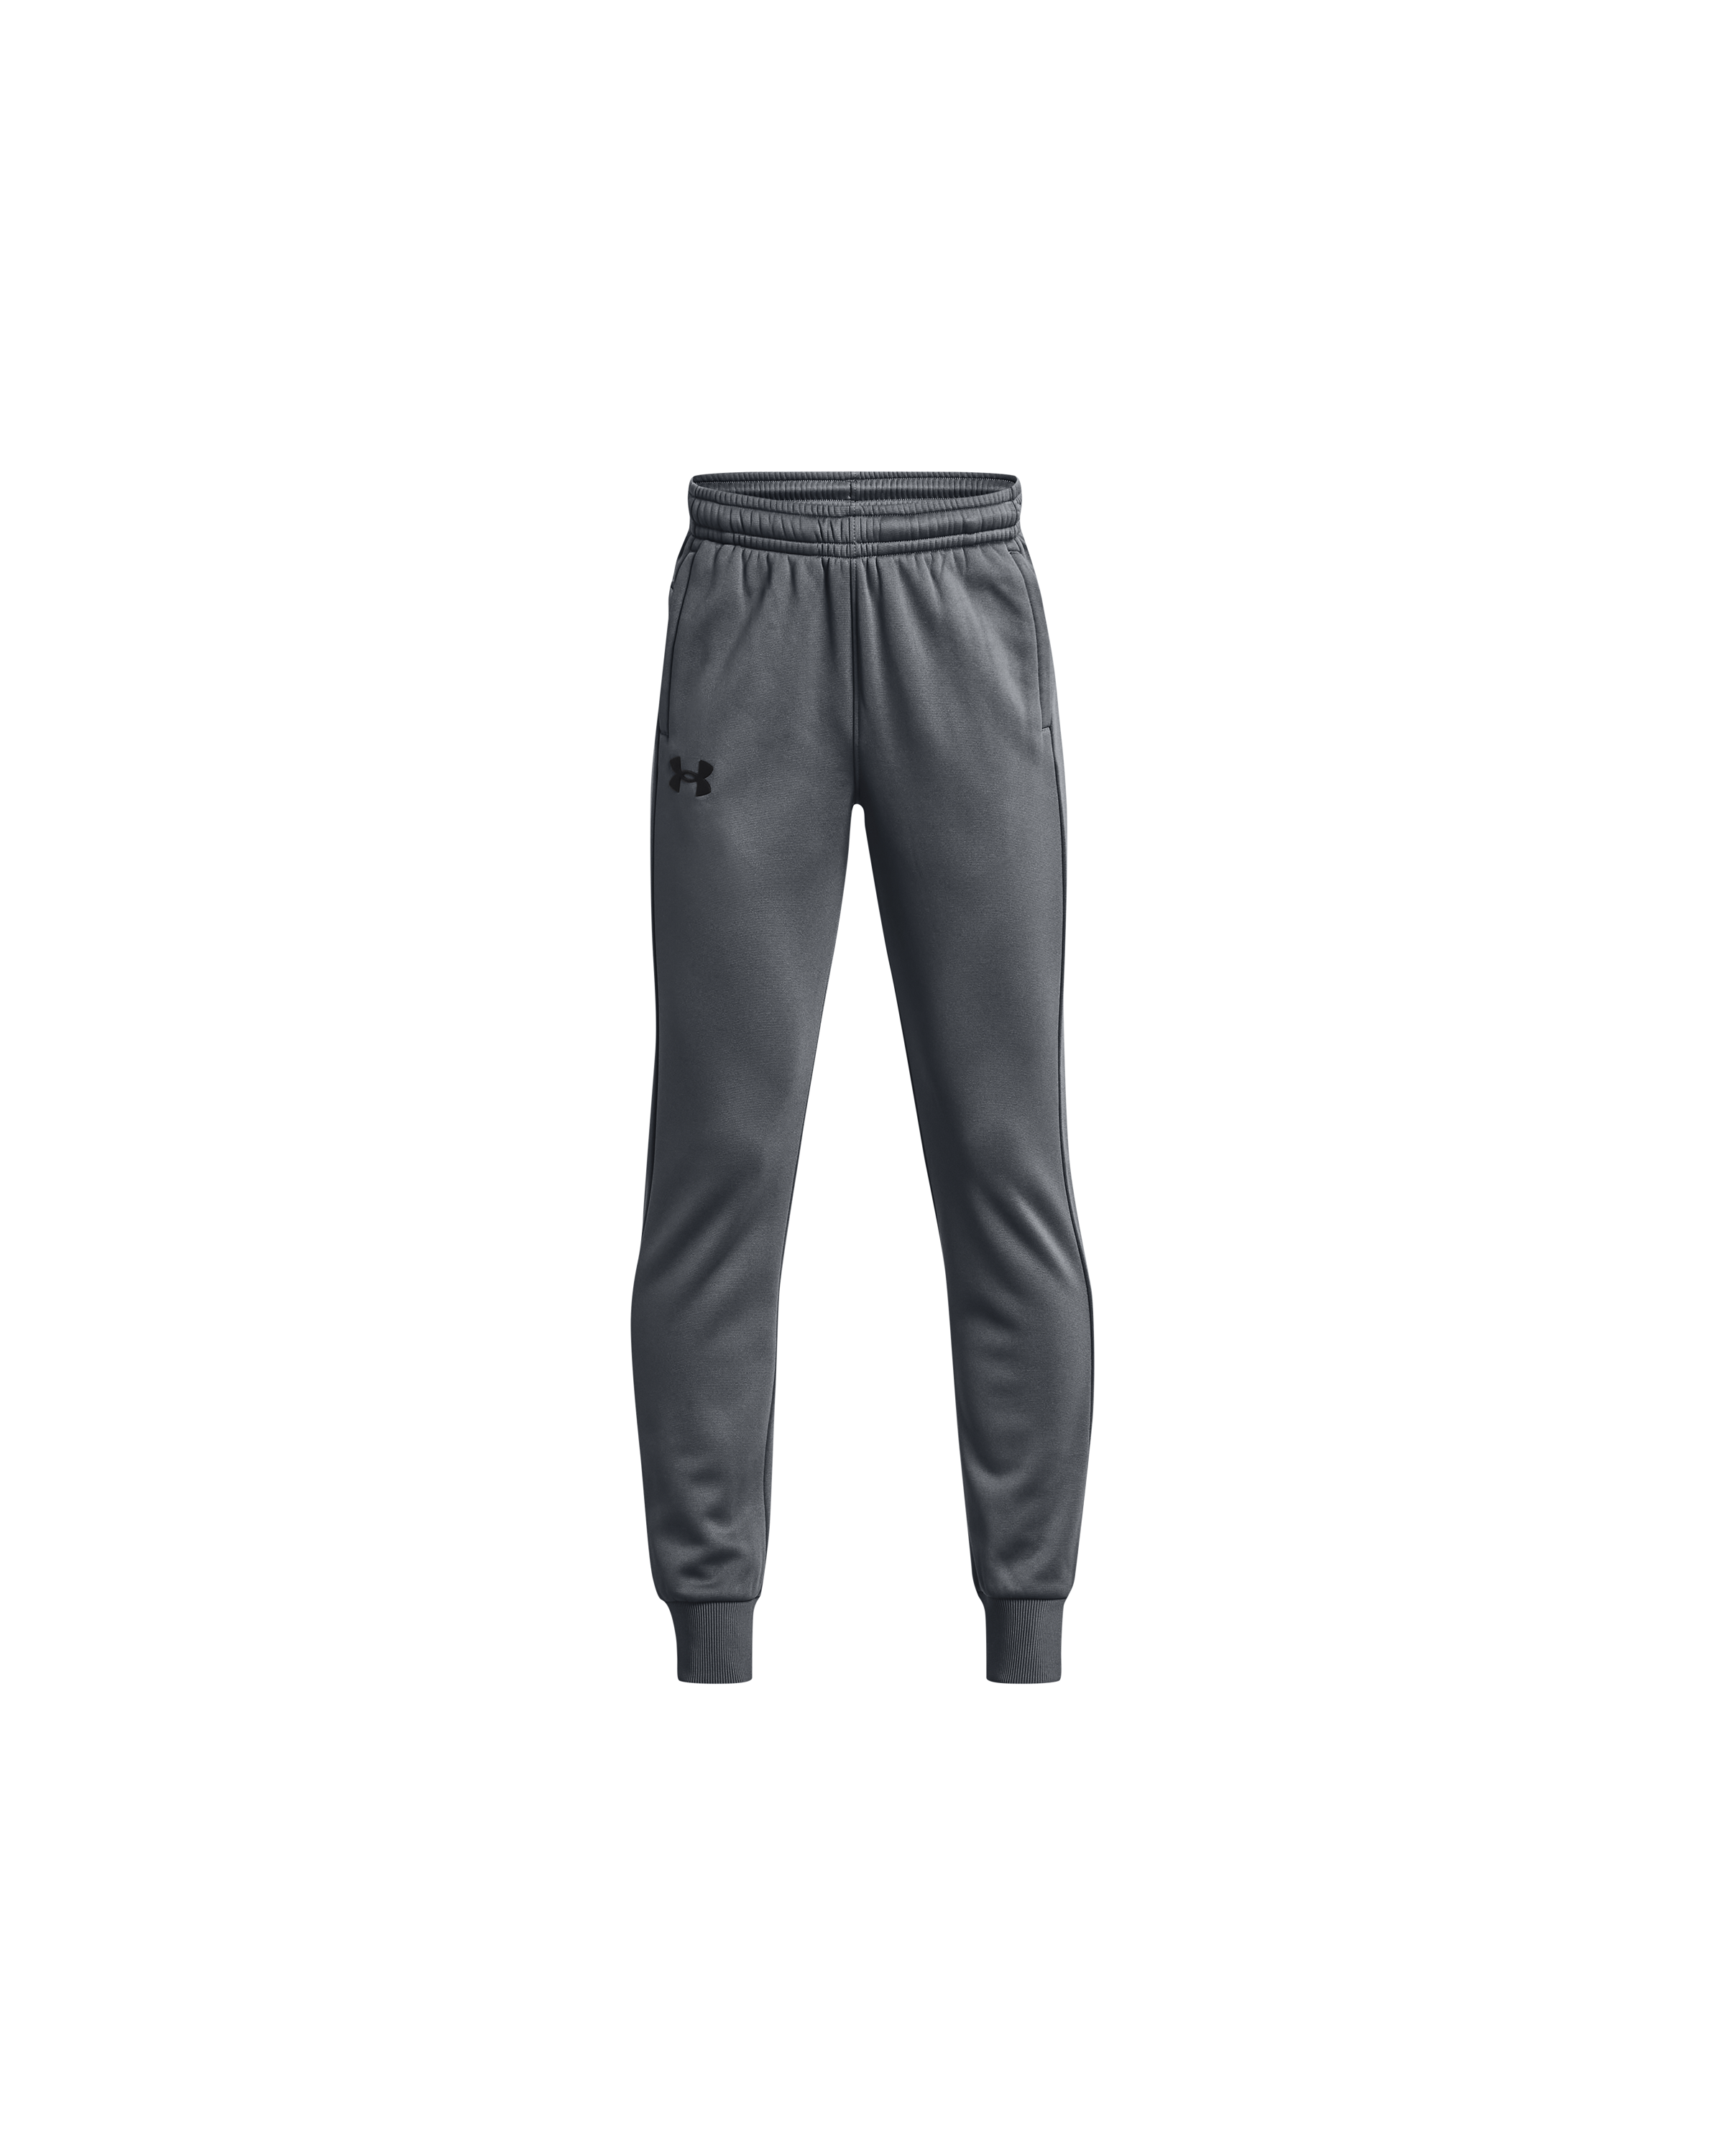 Junior Boys' [8-20] Brawler 2.0 Tapered Pant from Under Armour